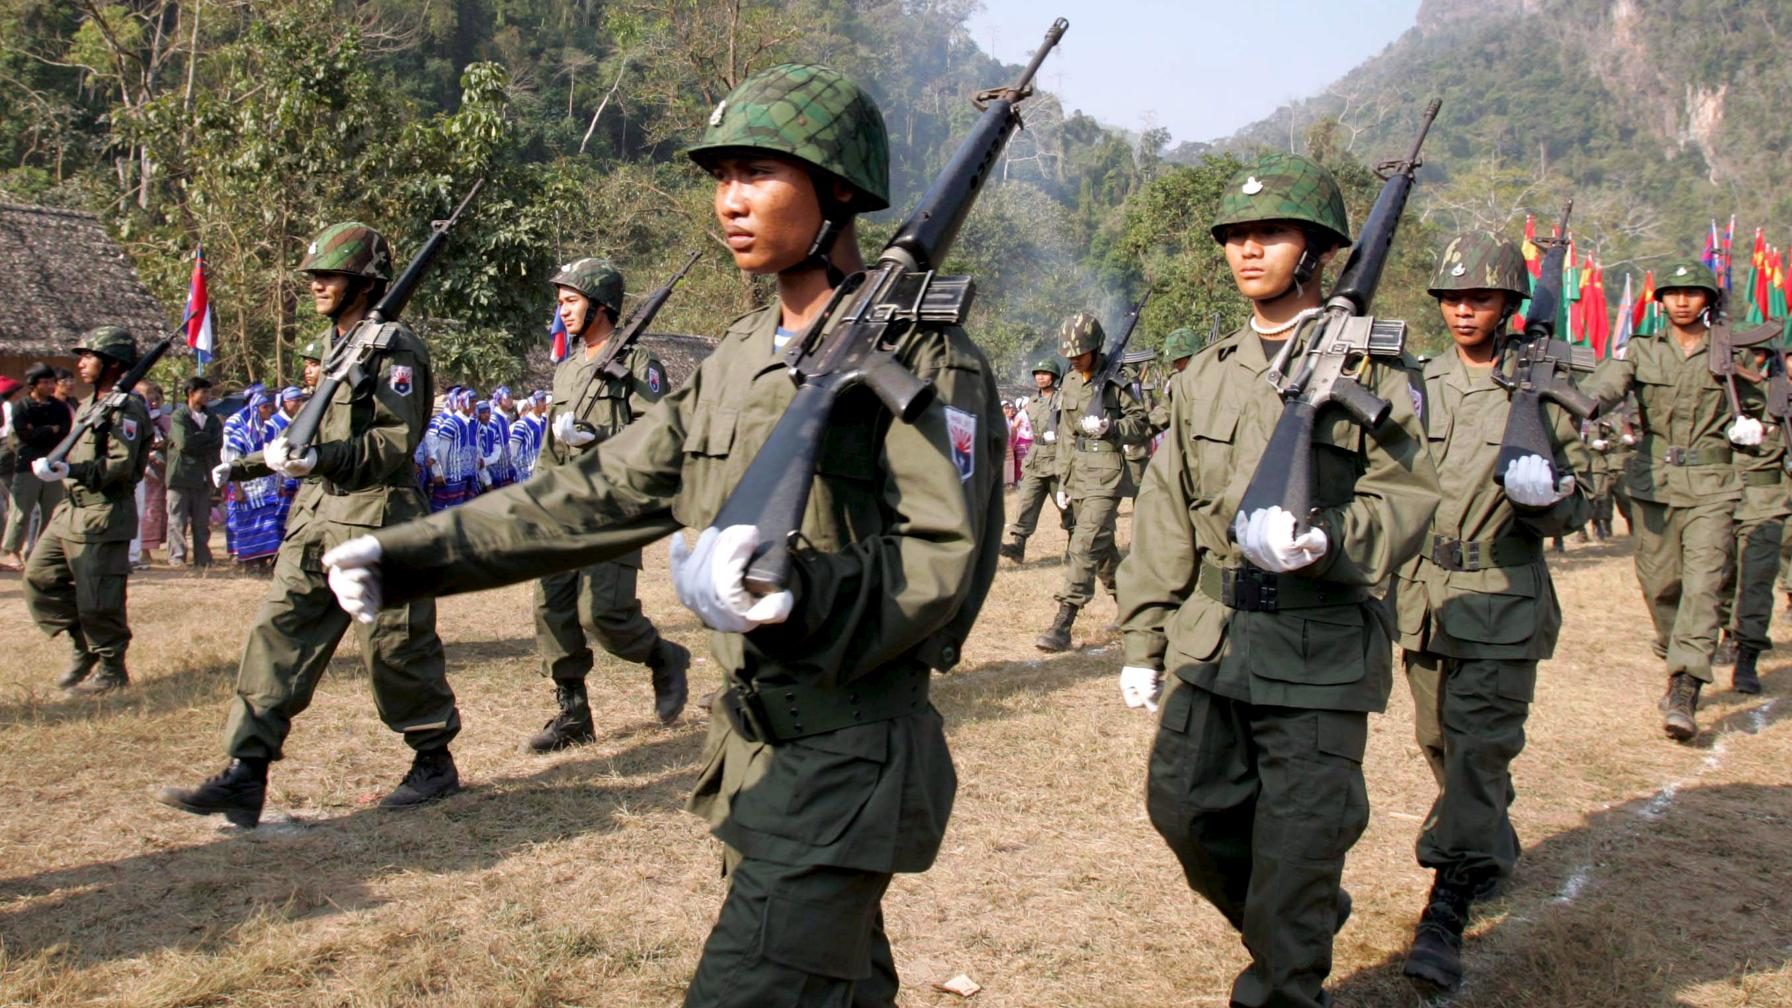 A file photo dated on 31 January 2006 shows Karen National Union (KNU) guerillas as they parade during the 57th anniversary of Karen Resistance Day at the Karen National Union Army rebel jungle stronghold, Mu Aye Pu, Myanmar. EPA/FILE RUNGROJ YONGRIT